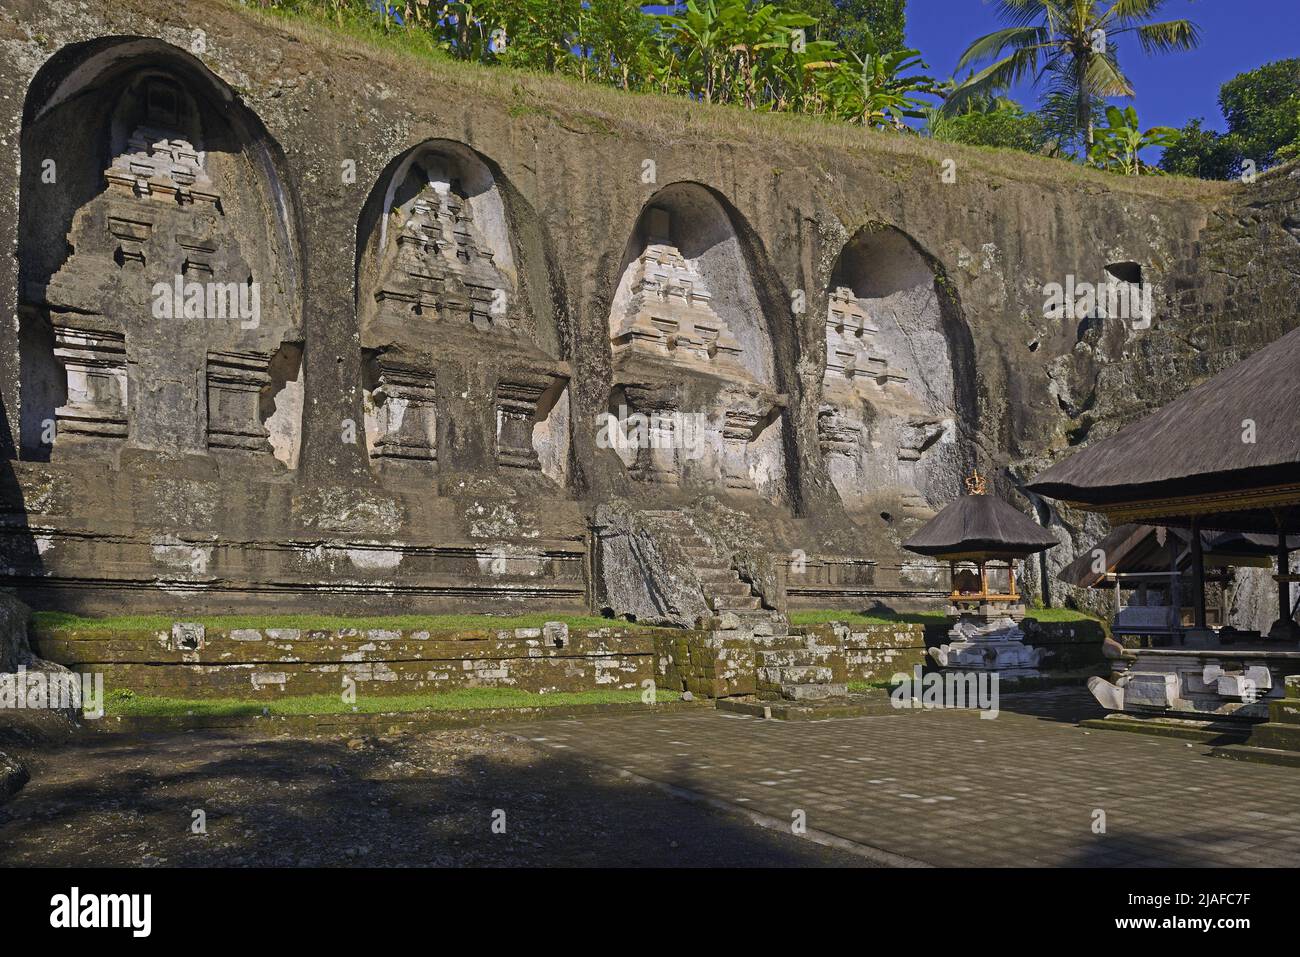 Shrines carved out of the rock at the temple Pura Gunung Kawi, Indonesia, Bali Stock Photo